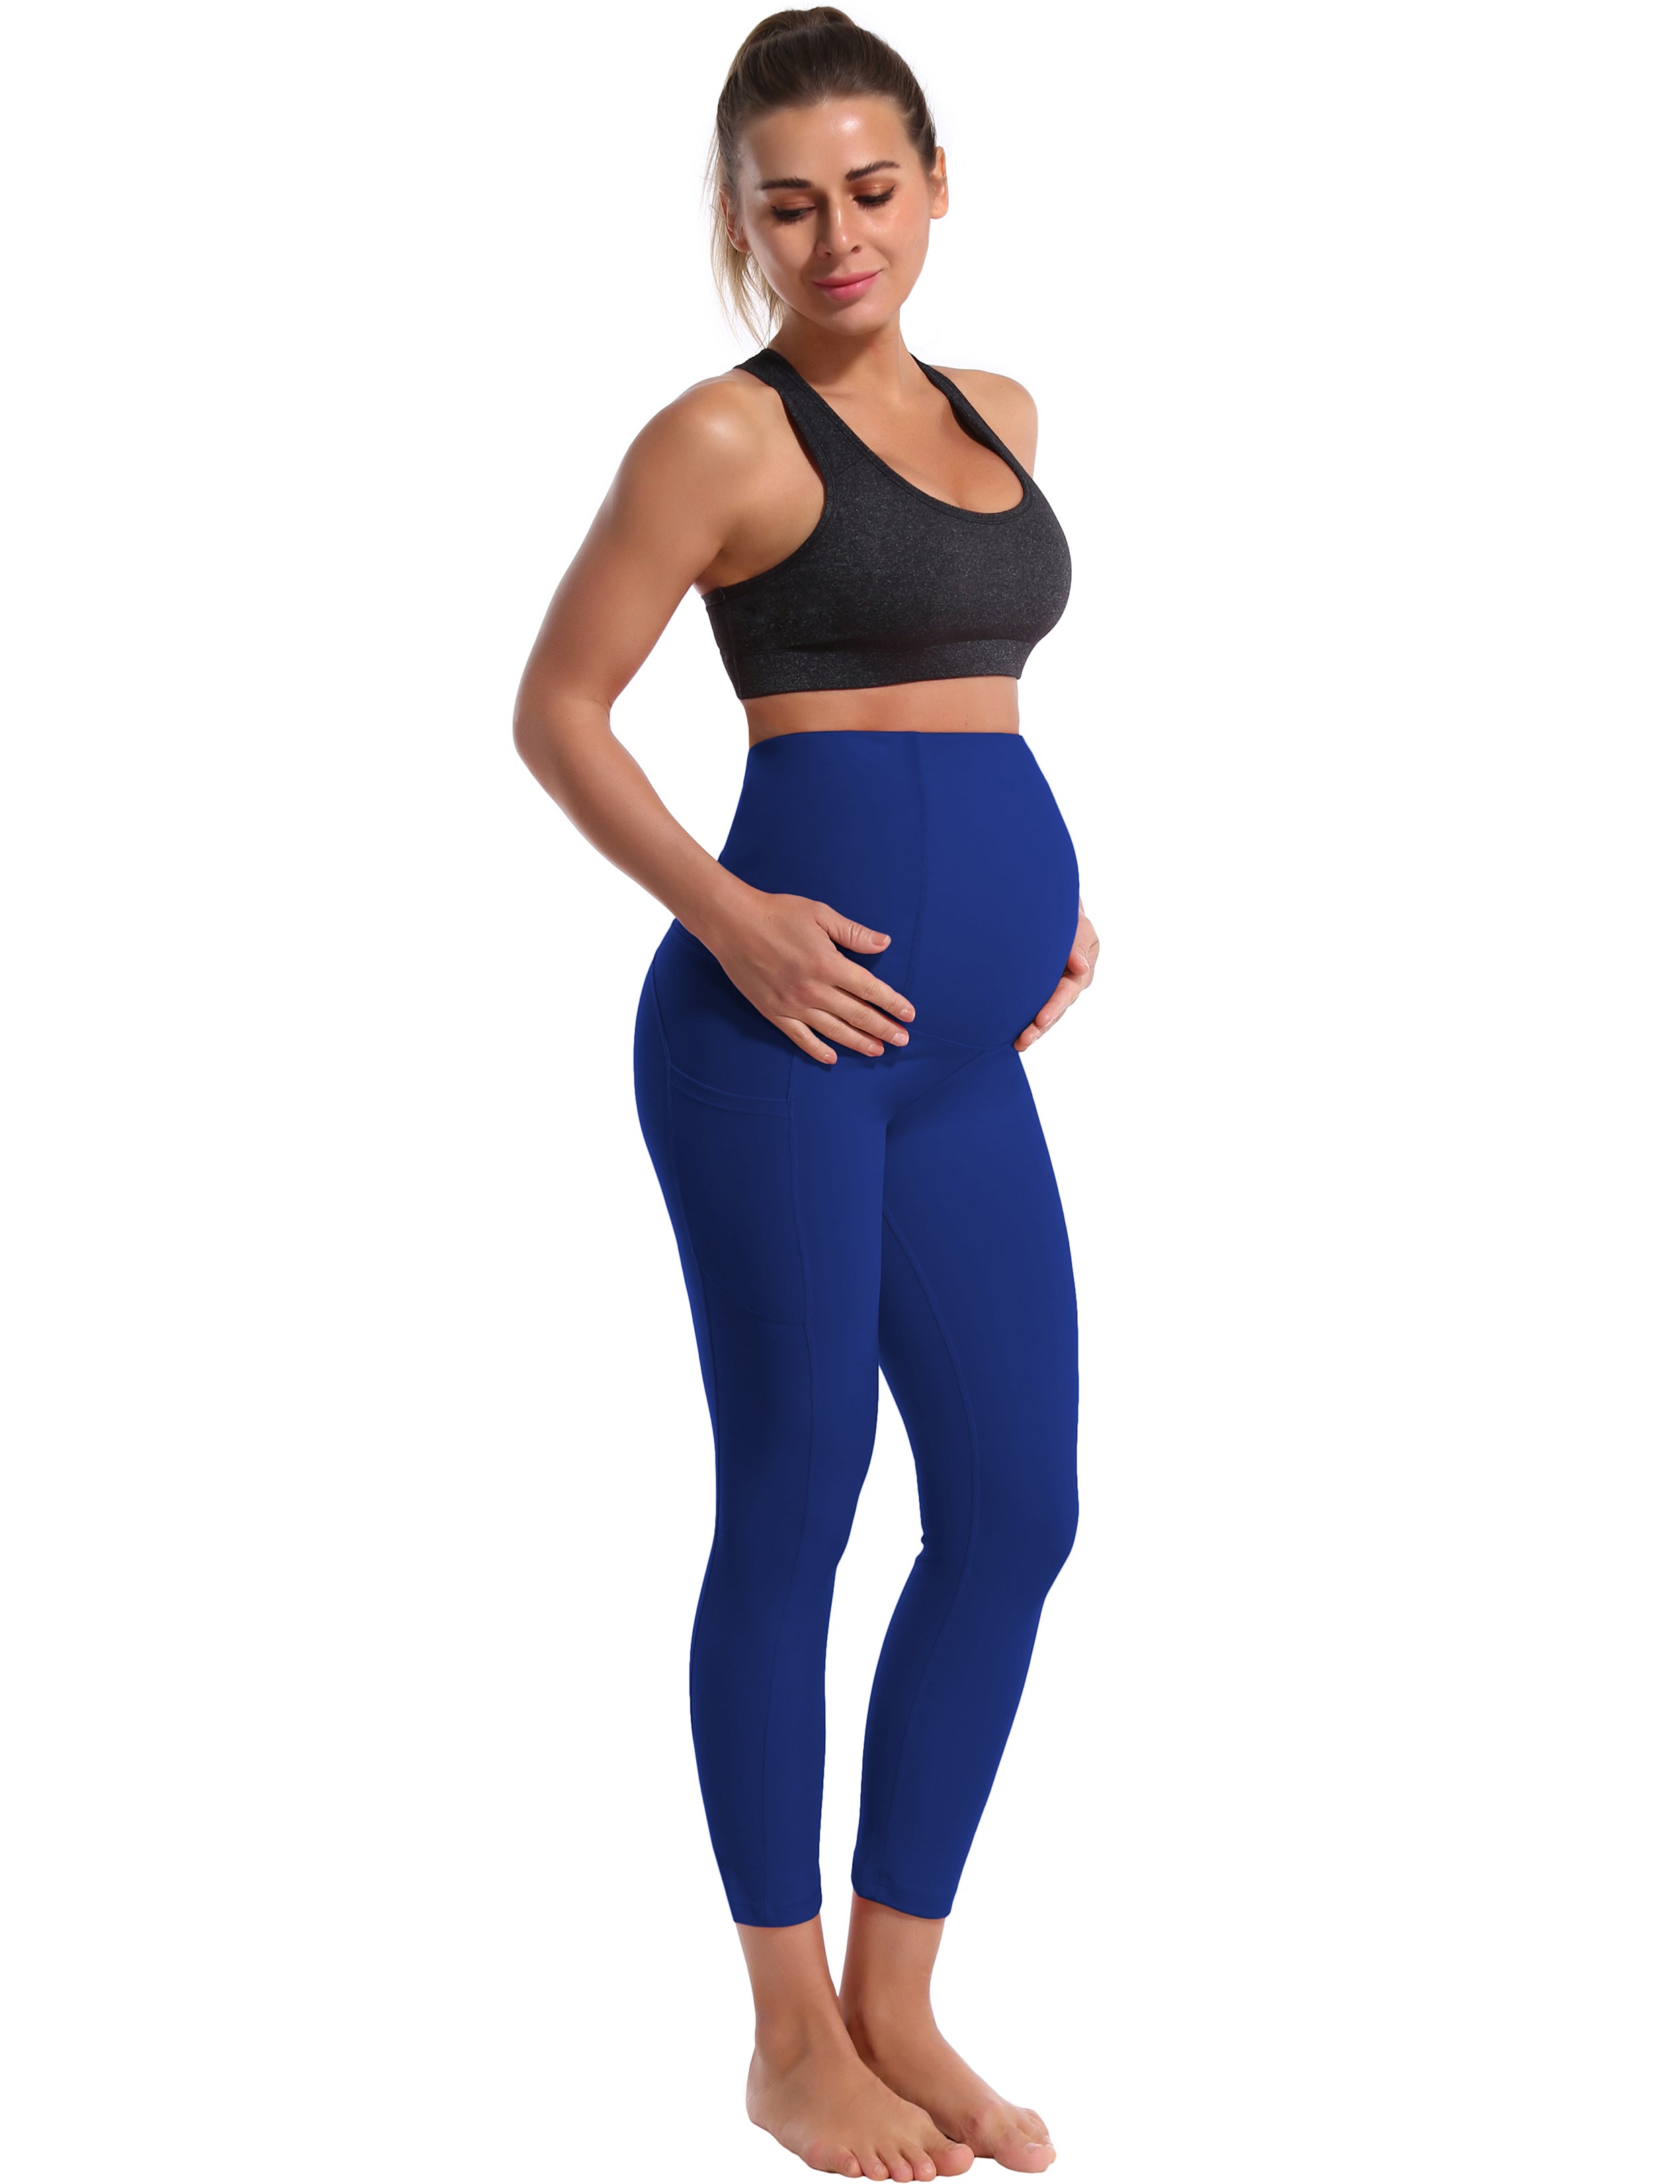 22" Side Pockets Maternity Gym Pants navy 87%Nylon/13%Spandex Softest-ever fabric High elasticity 4-way stretch Fabric doesn't attract lint easily No see-through Moisture-wicking Machine wash